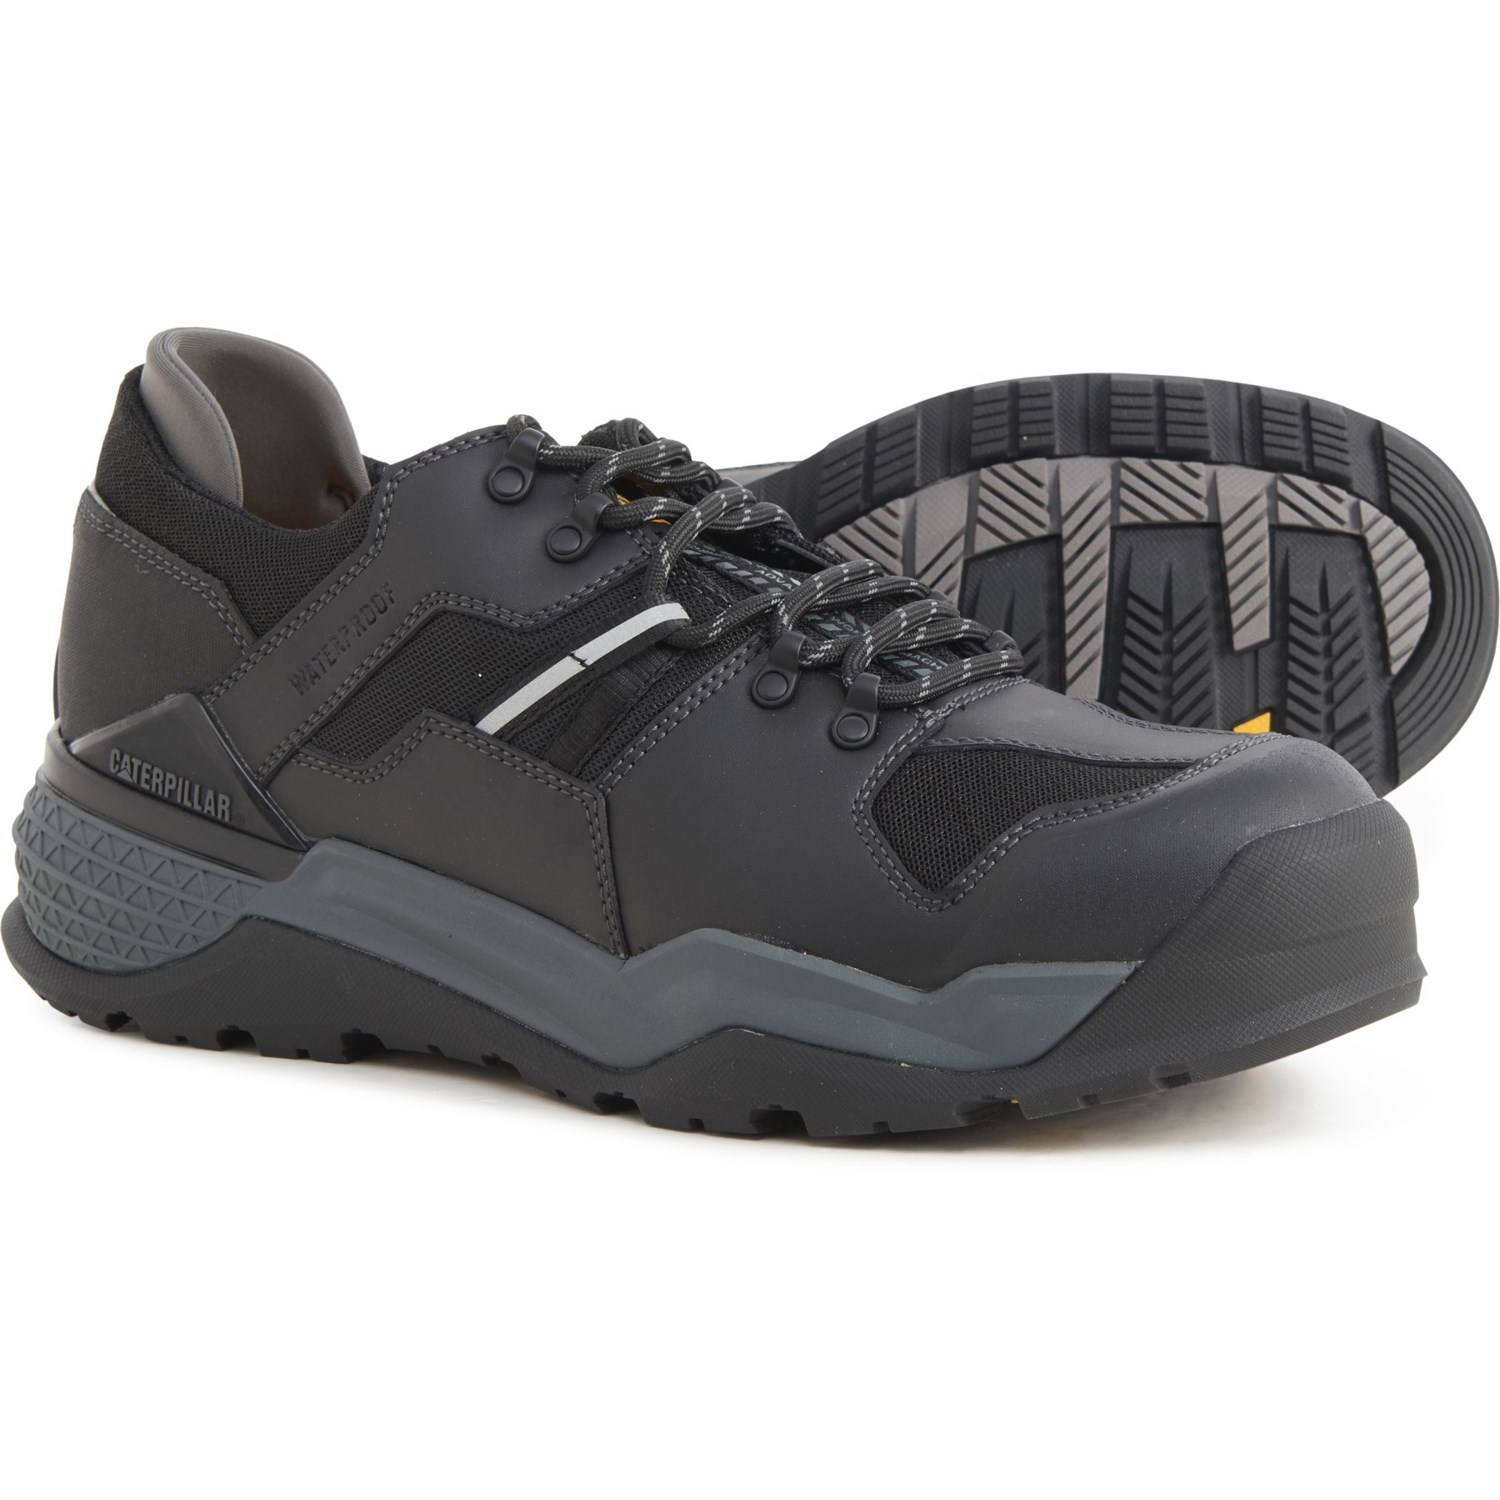 Caterpillar Provoke Work Shoes (For Men) - Save 62%